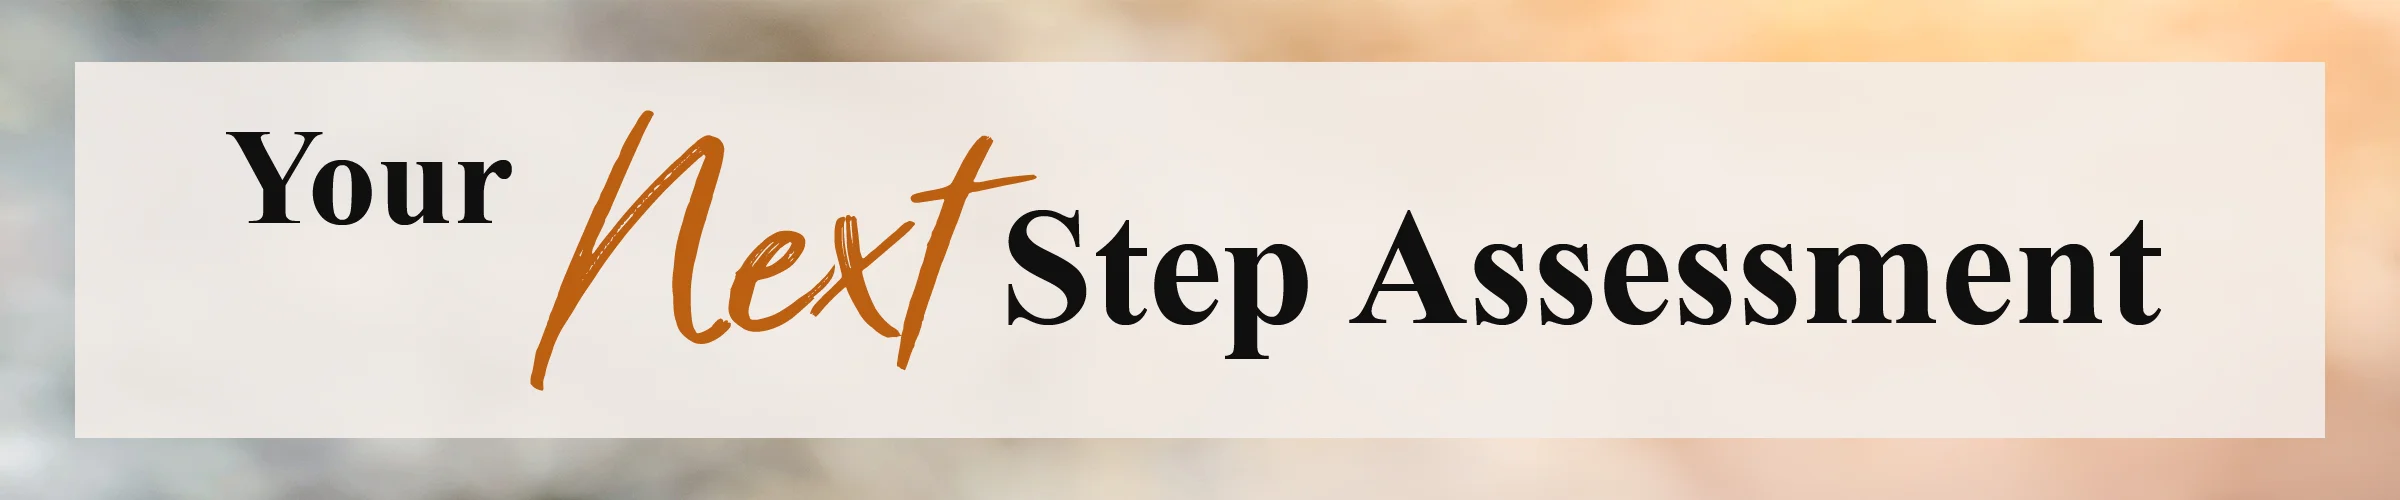 Your Next Best Financial Step